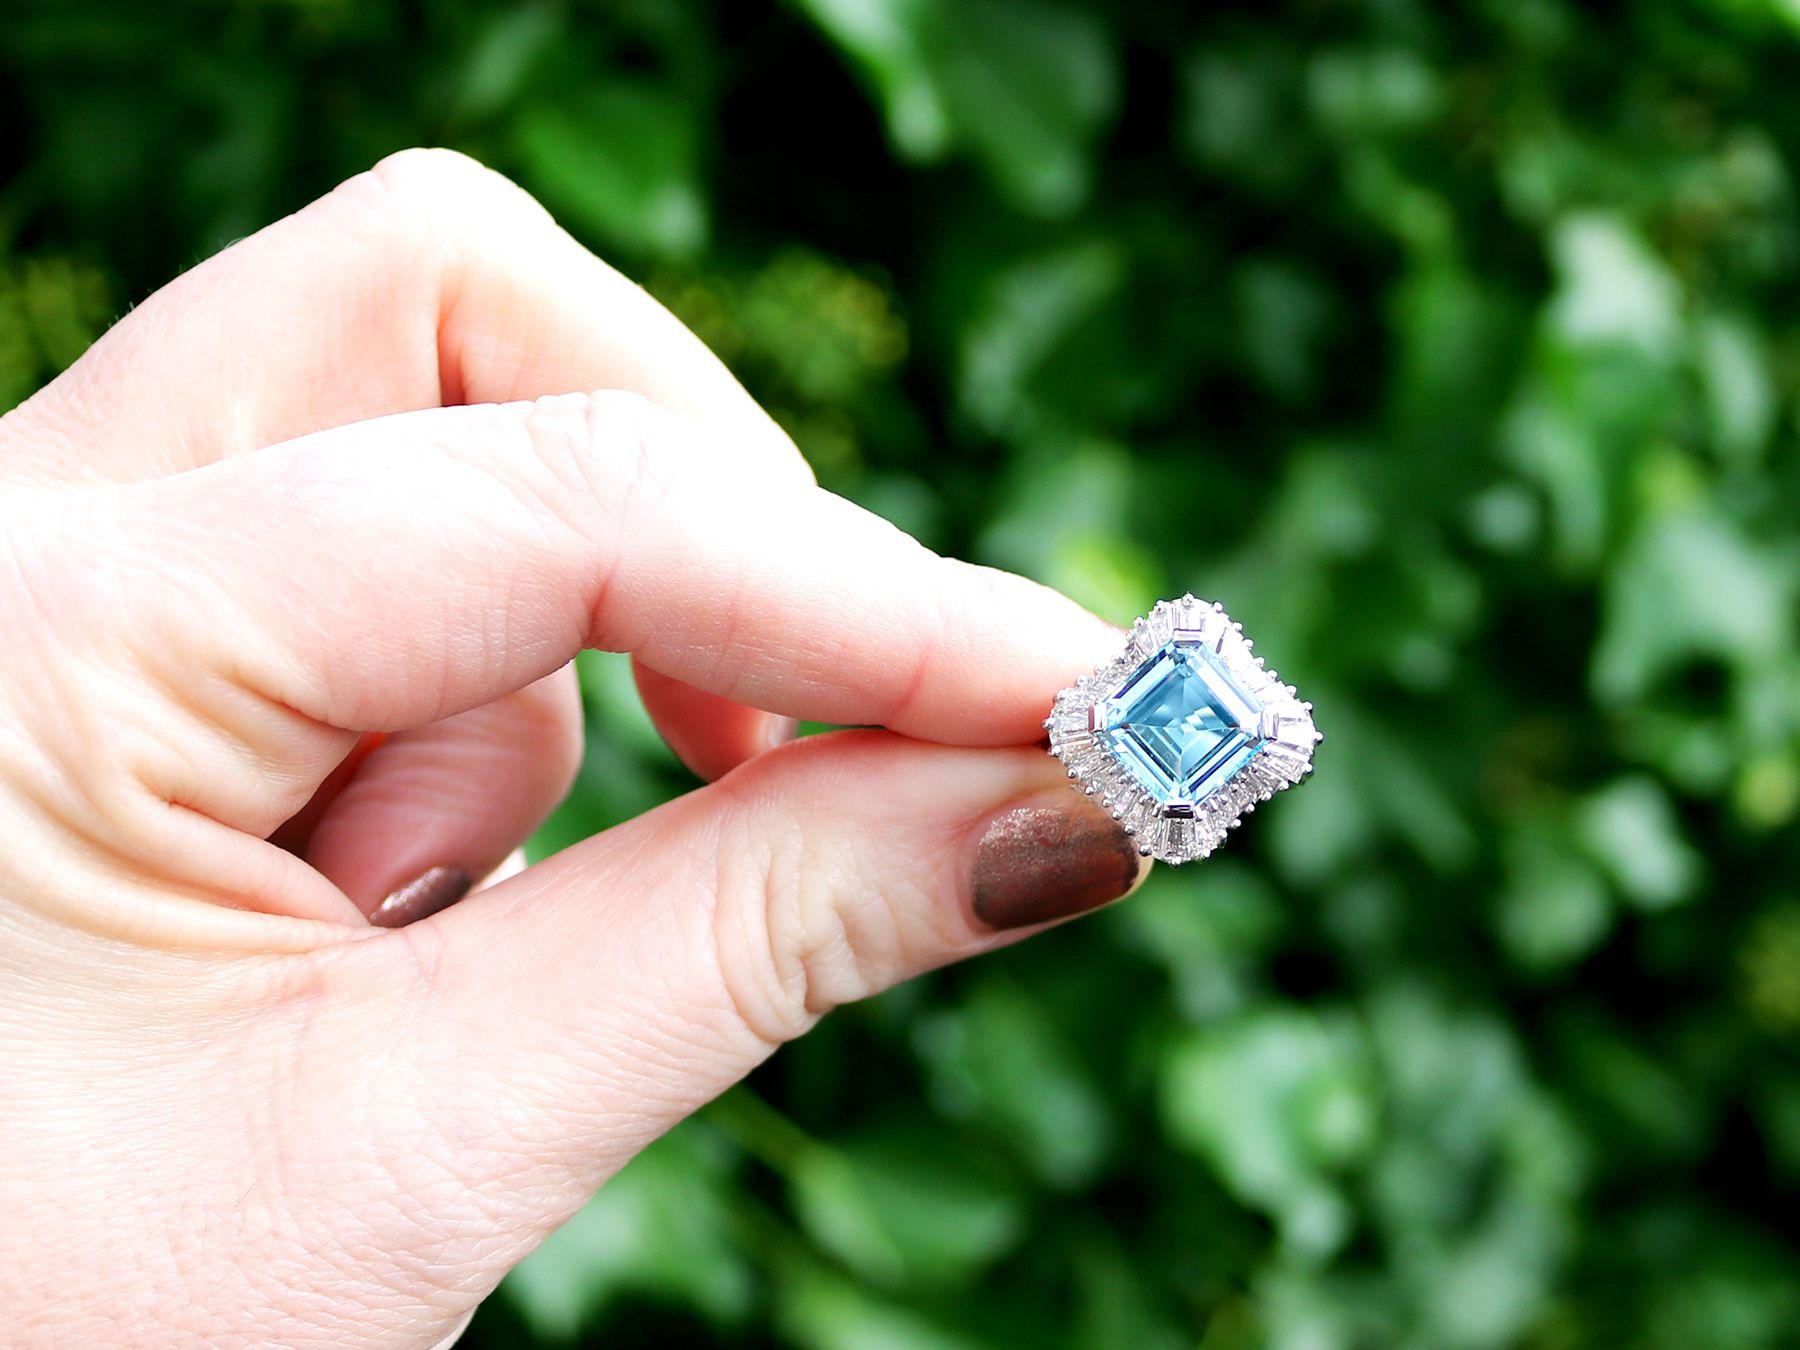 A stunning, fine and impressive 4.12 carat aquamarine and 1.95 carat diamond, platinum dress ring; part of our diverse vintage jewelry collections.

This stunning, fine and impressive vintage aquamarine and diamond ring has been crafted in